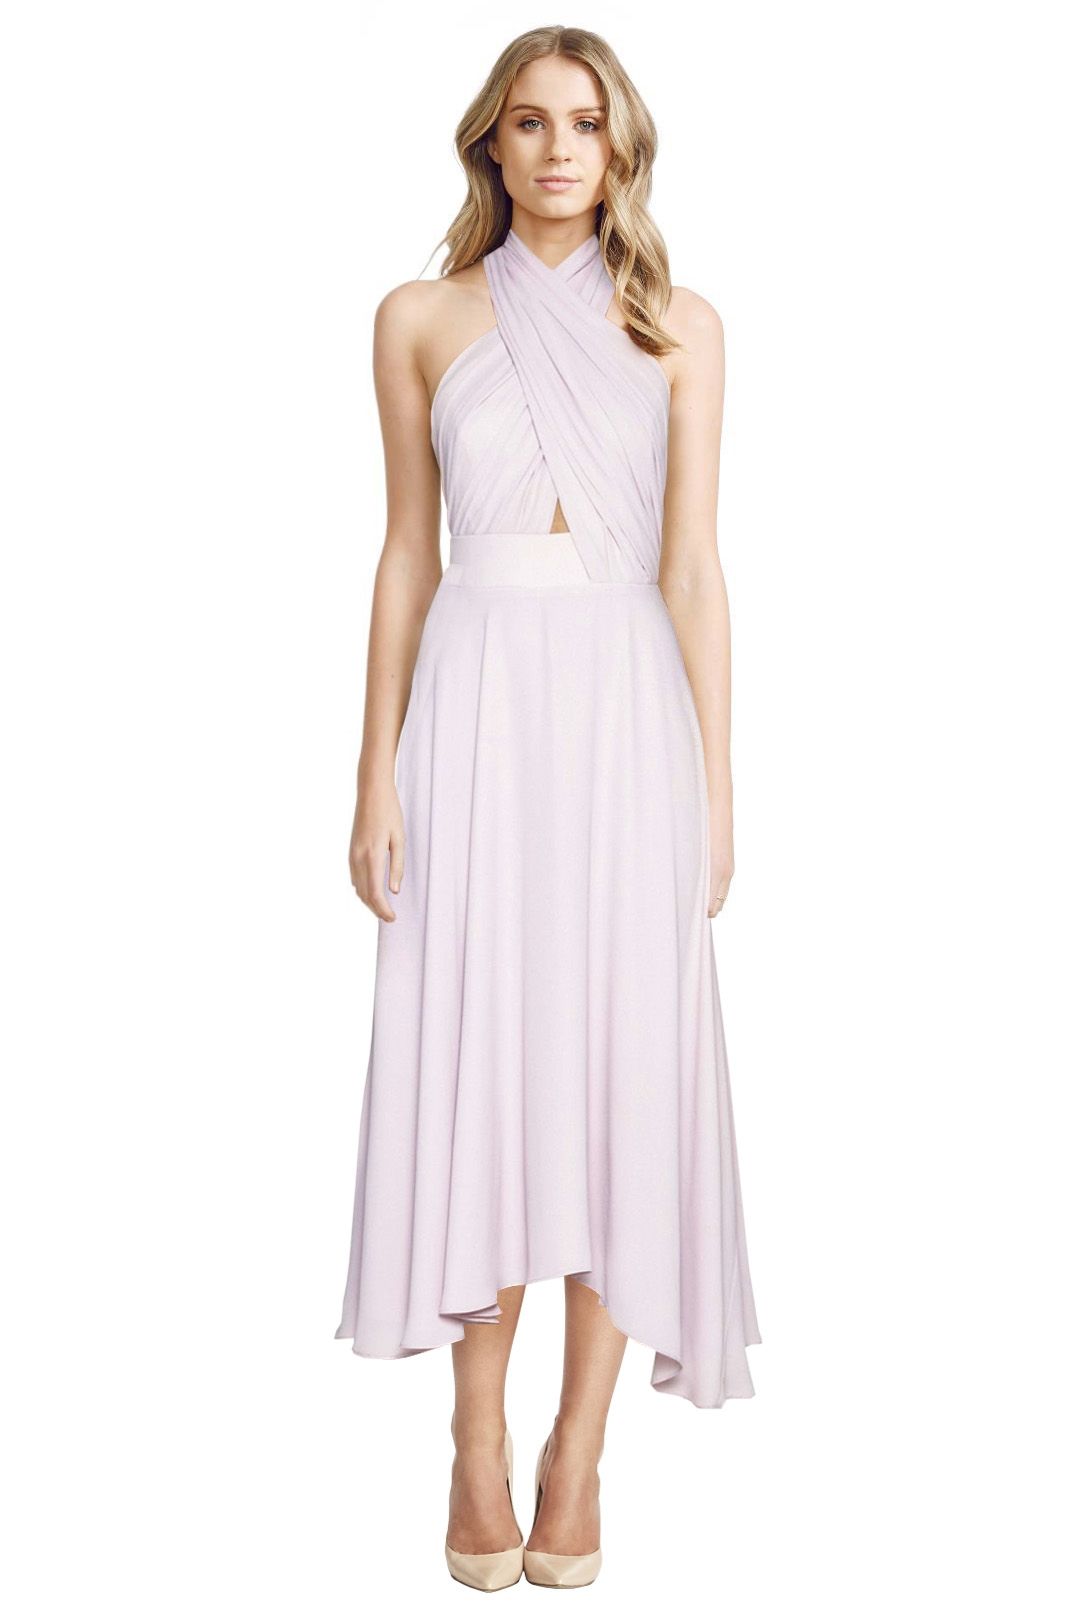 Camilla and Marc - Golden Myna Dress - Pink - Front